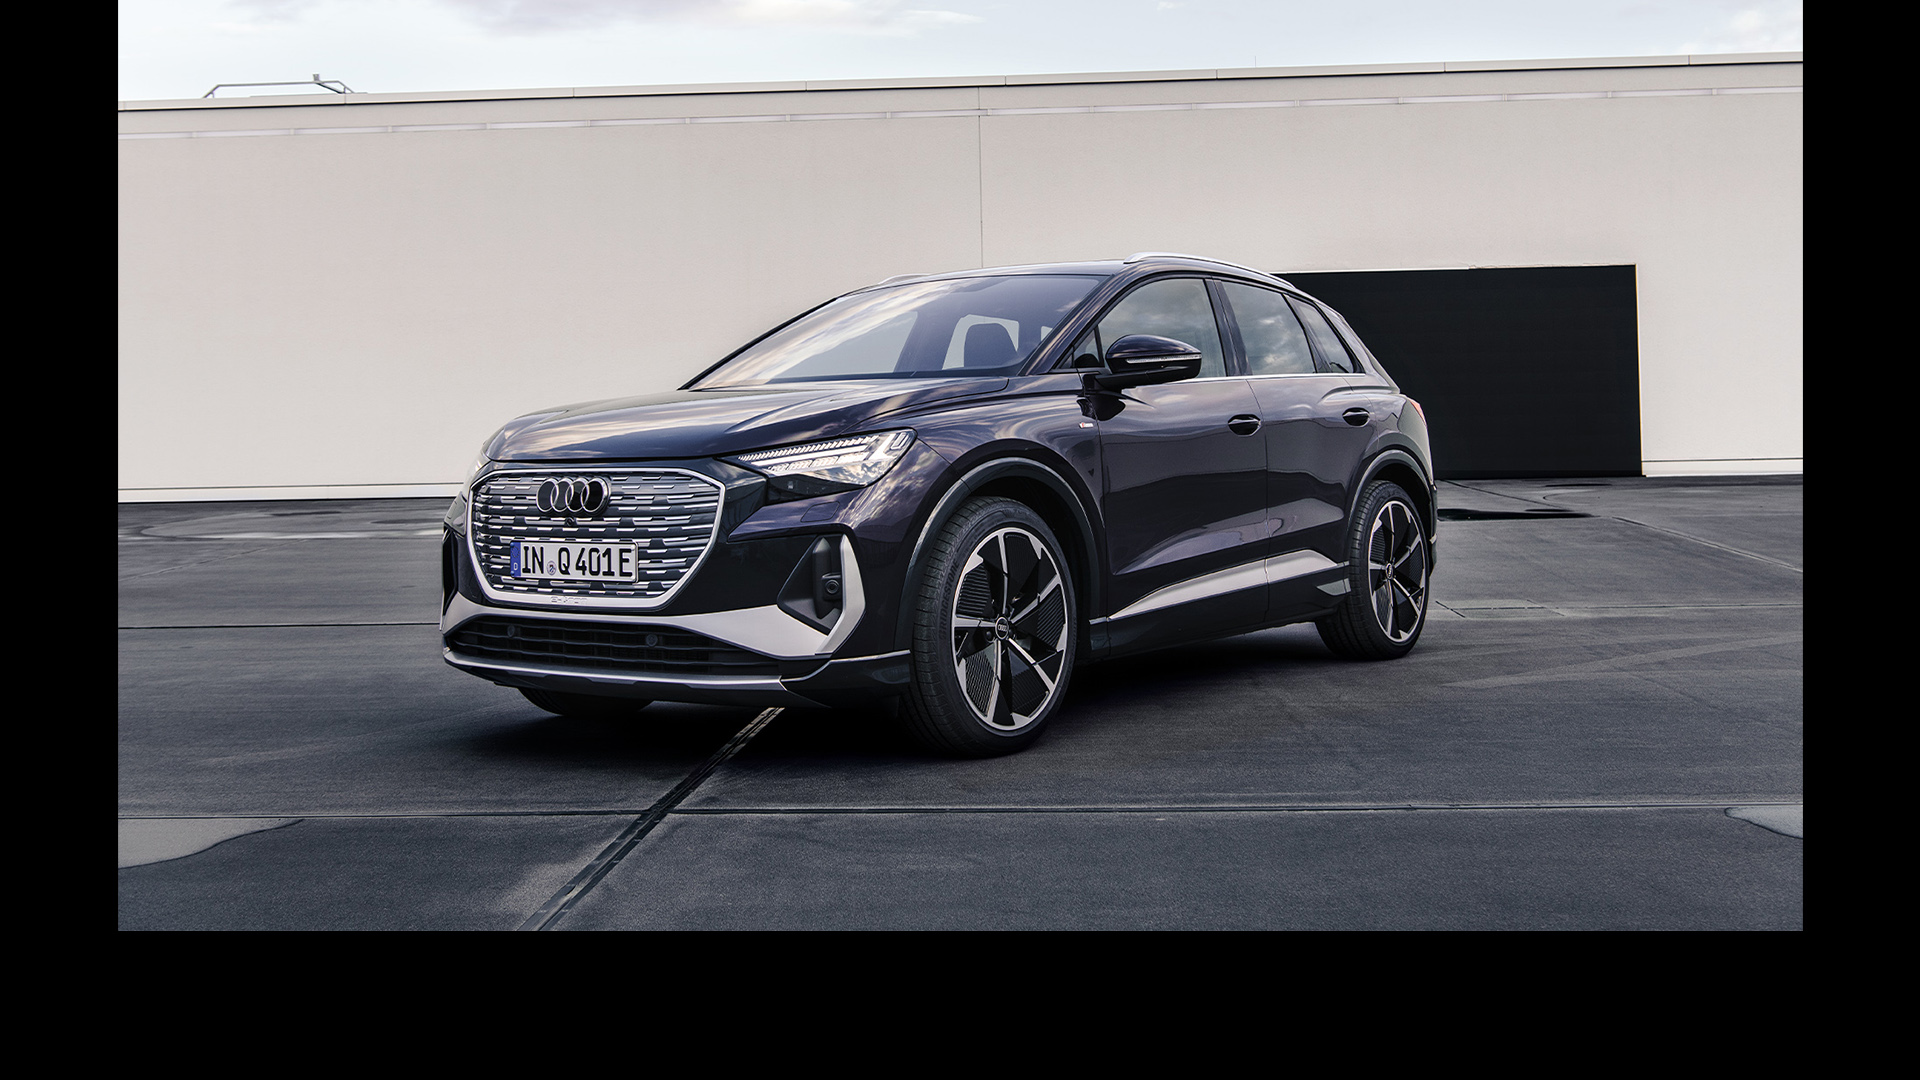 Frontal view of the Audi Q4 e-tron